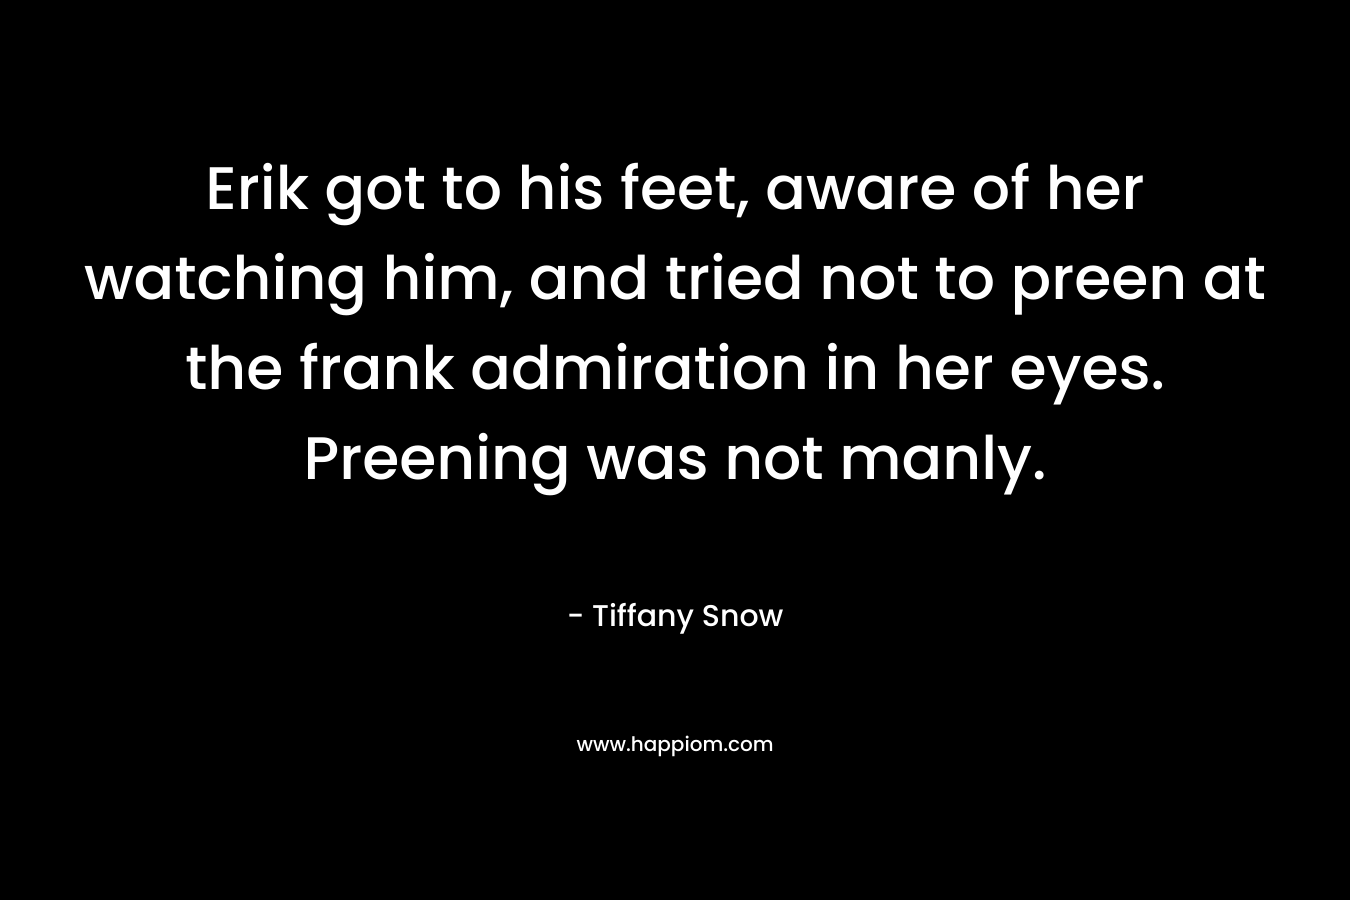 Erik got to his feet, aware of her watching him, and tried not to preen at the frank admiration in her eyes. Preening was not manly. – Tiffany Snow